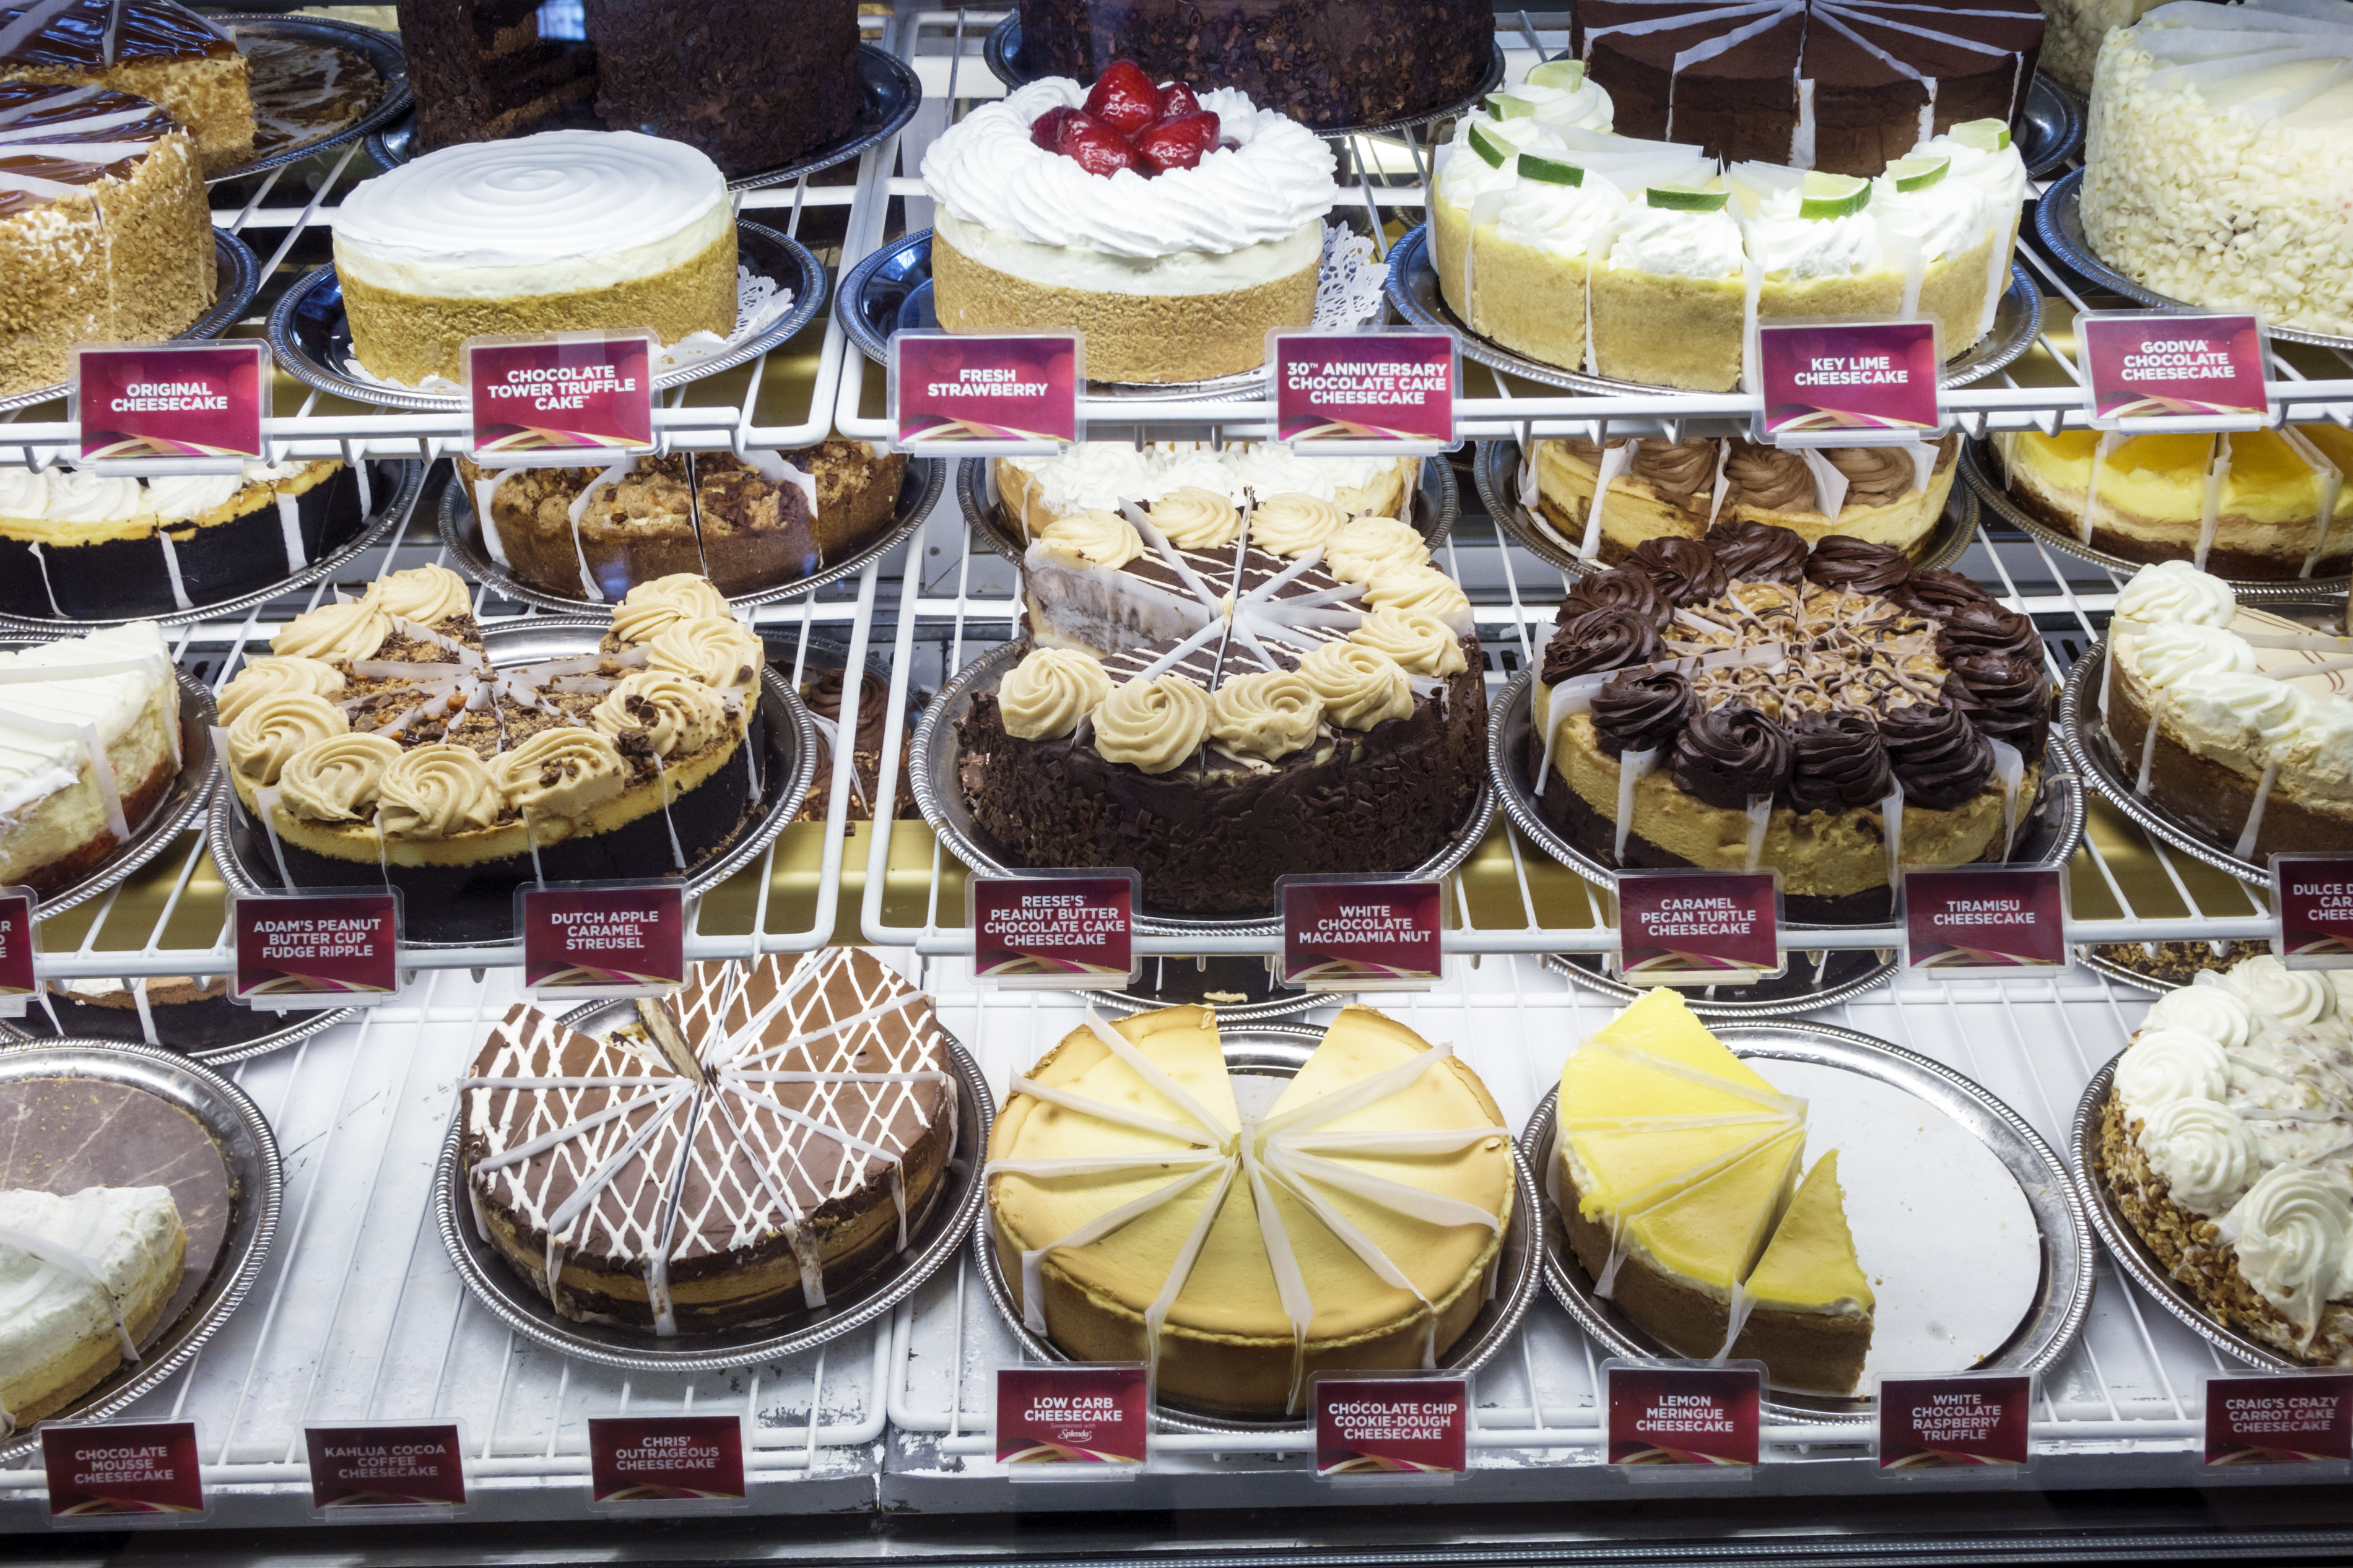 The refrigerated display case at the Cheesecake Factory at Coastland Center Shopping Mall.